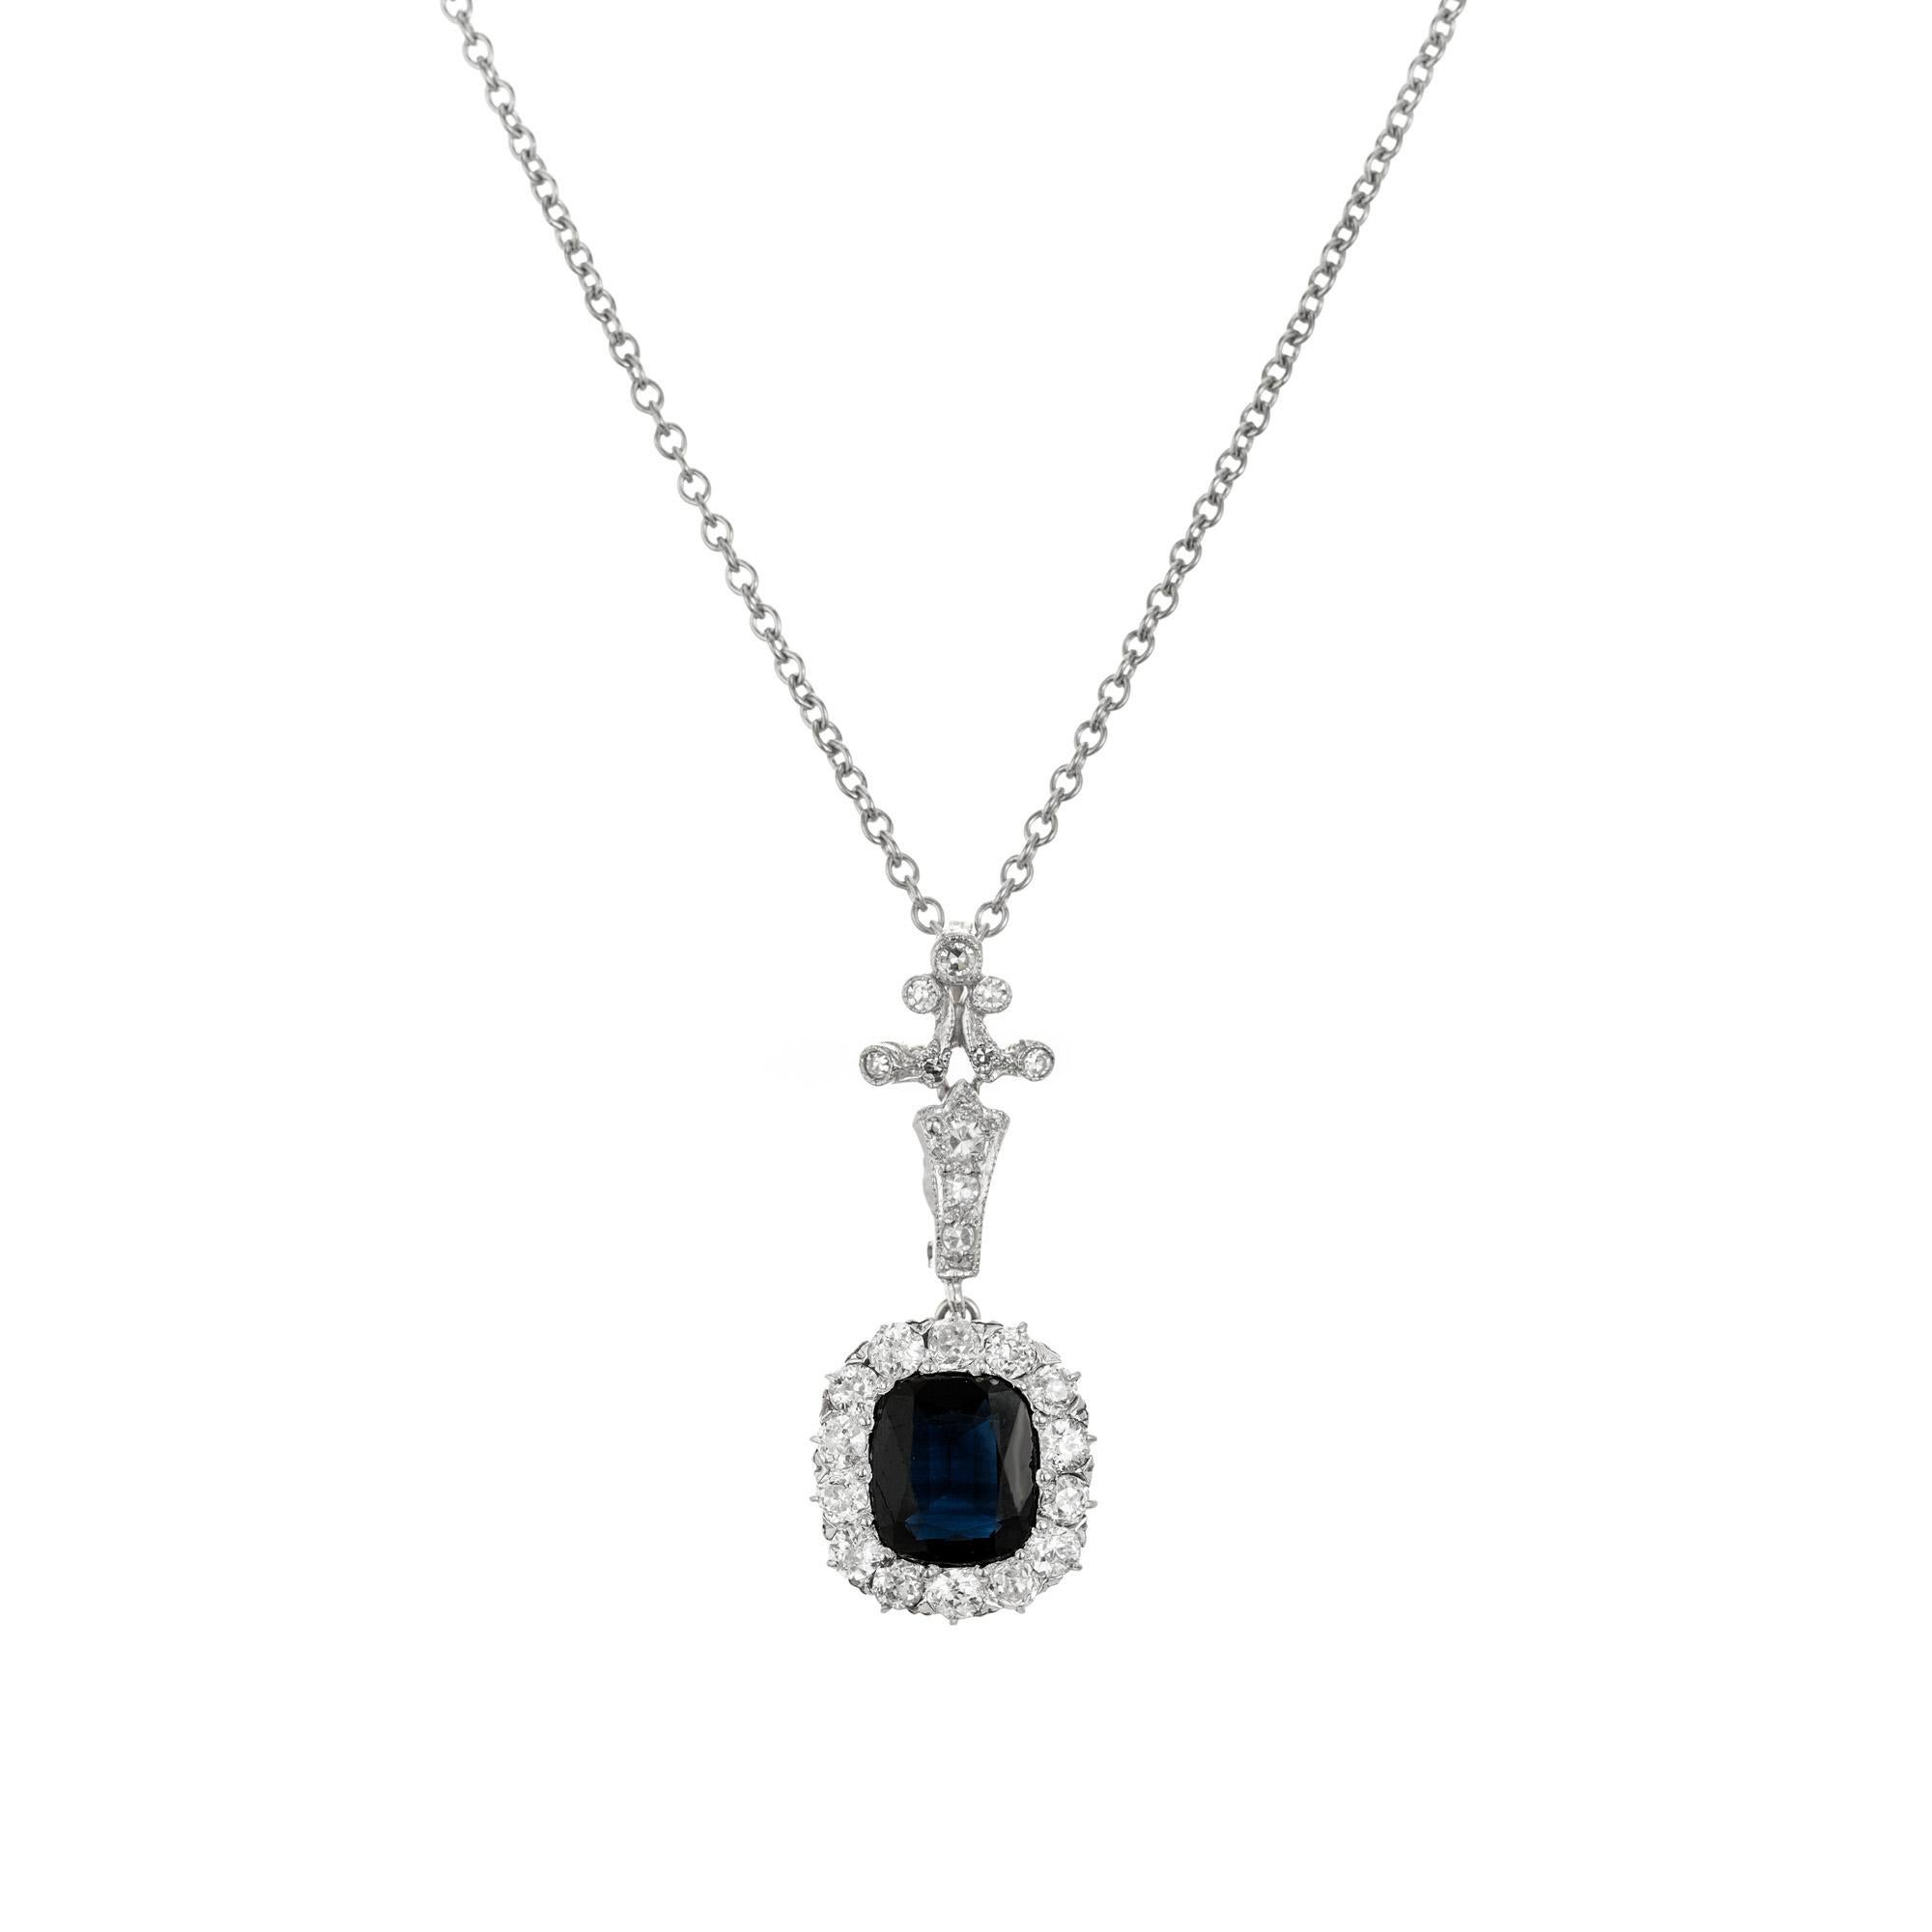 1890's Victorian royal deep blue natural platinum sapphire pendant necklace. At the center of this exquisite piece is a cushion cut 1.95ct rich deep blue sapphire mounted in a platinum setting with a halo of single cut diamonds. The bail is also